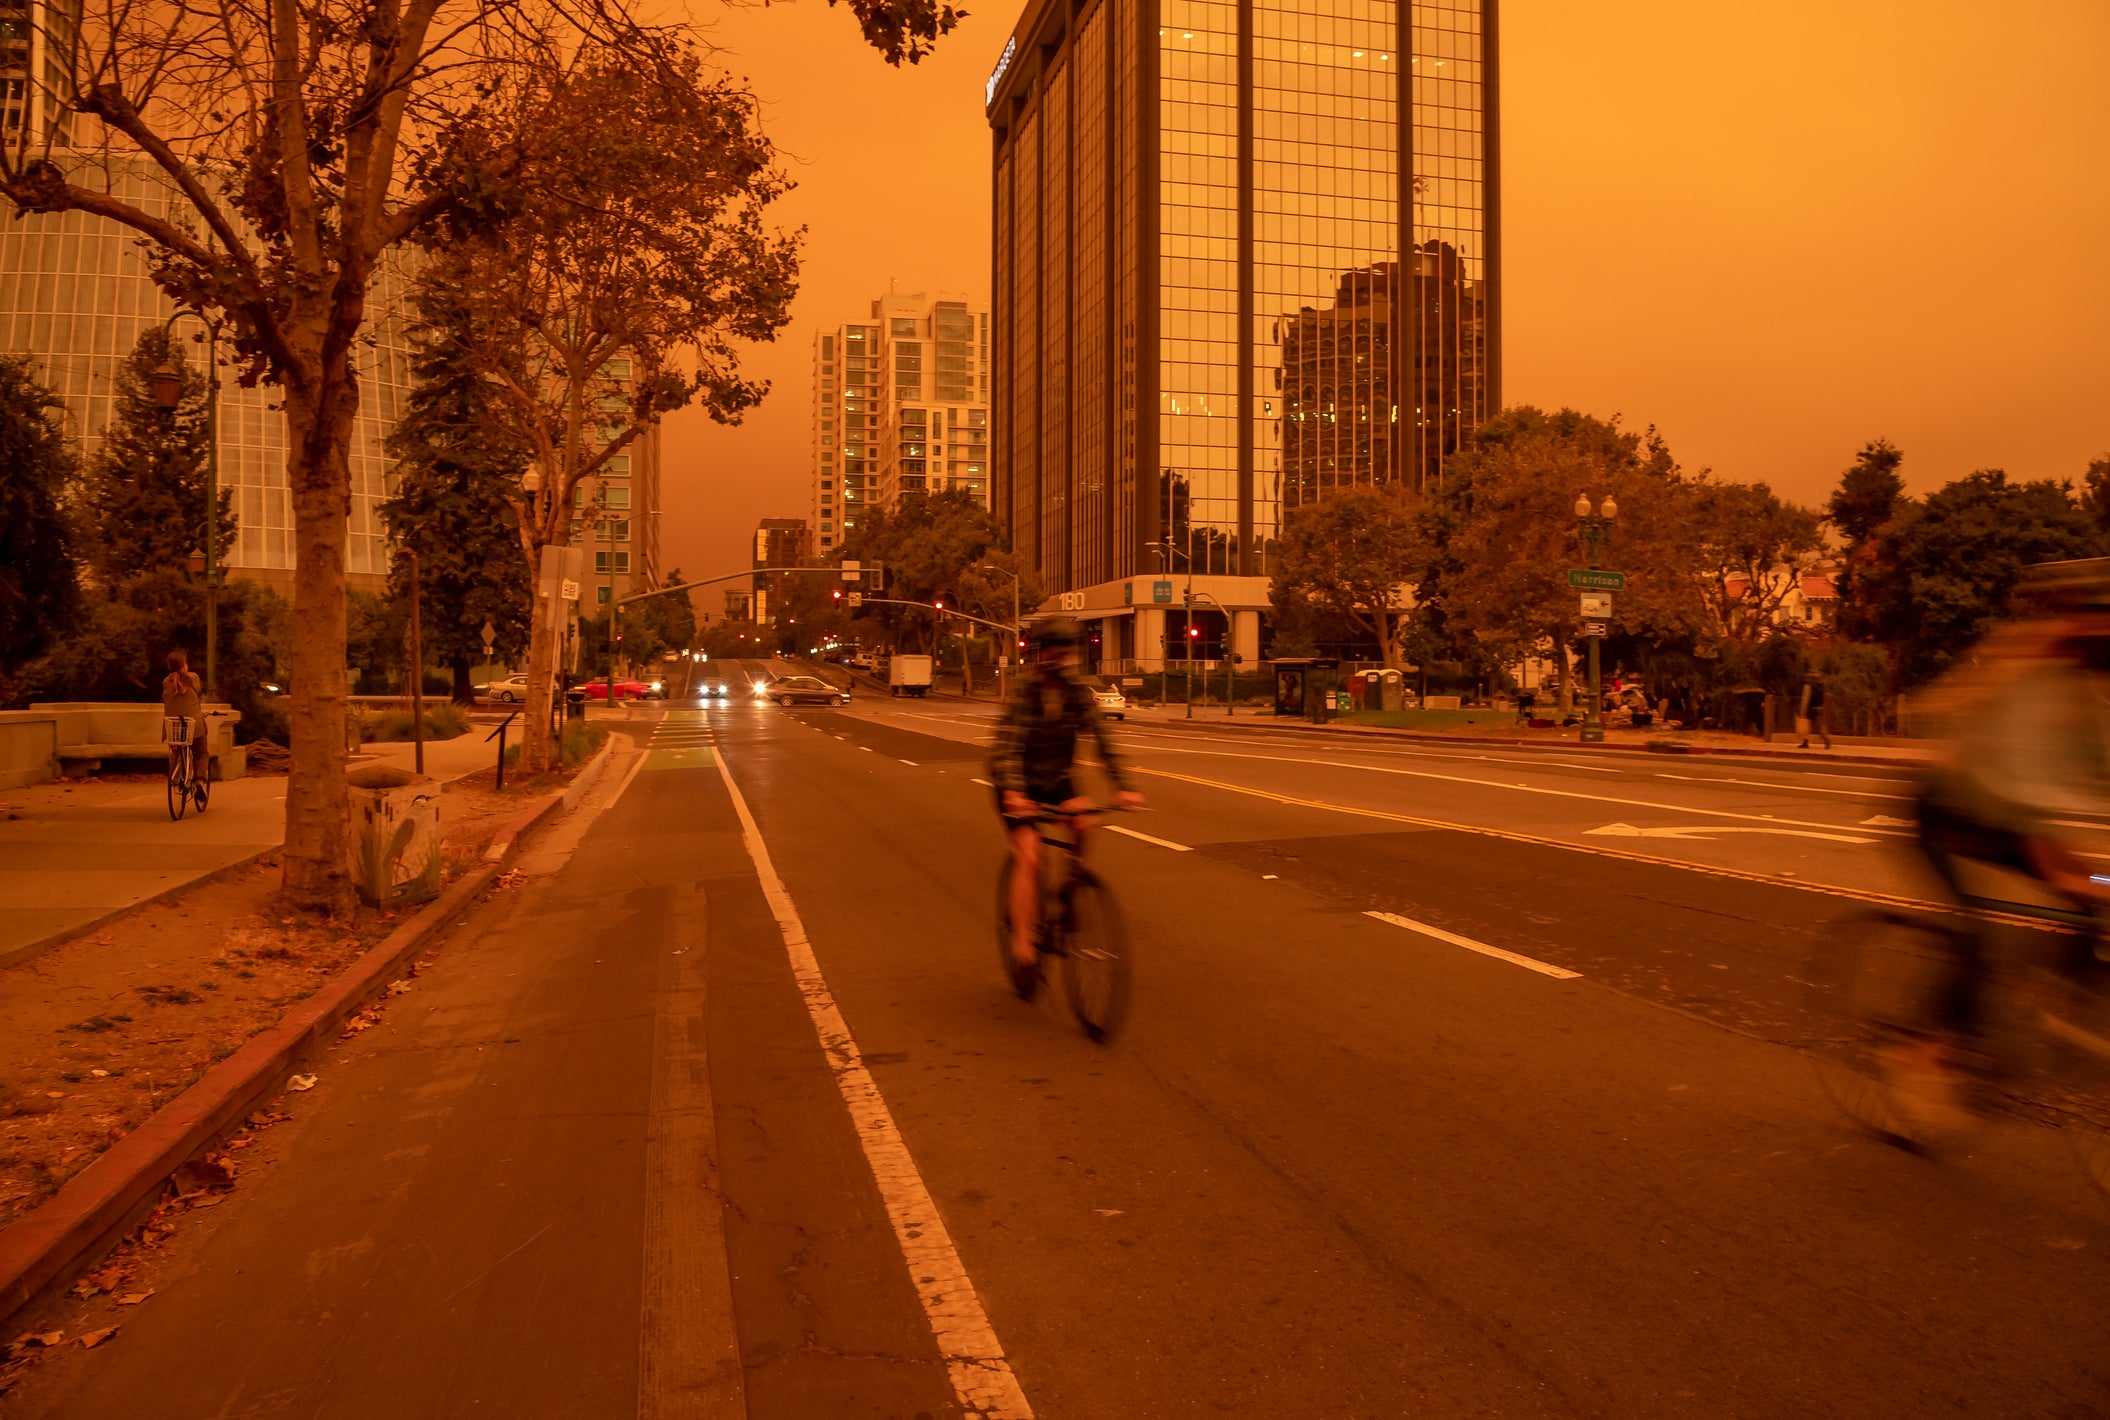 orange sky from wildfire smoke over Oakland California street with cyclist and buildings in background